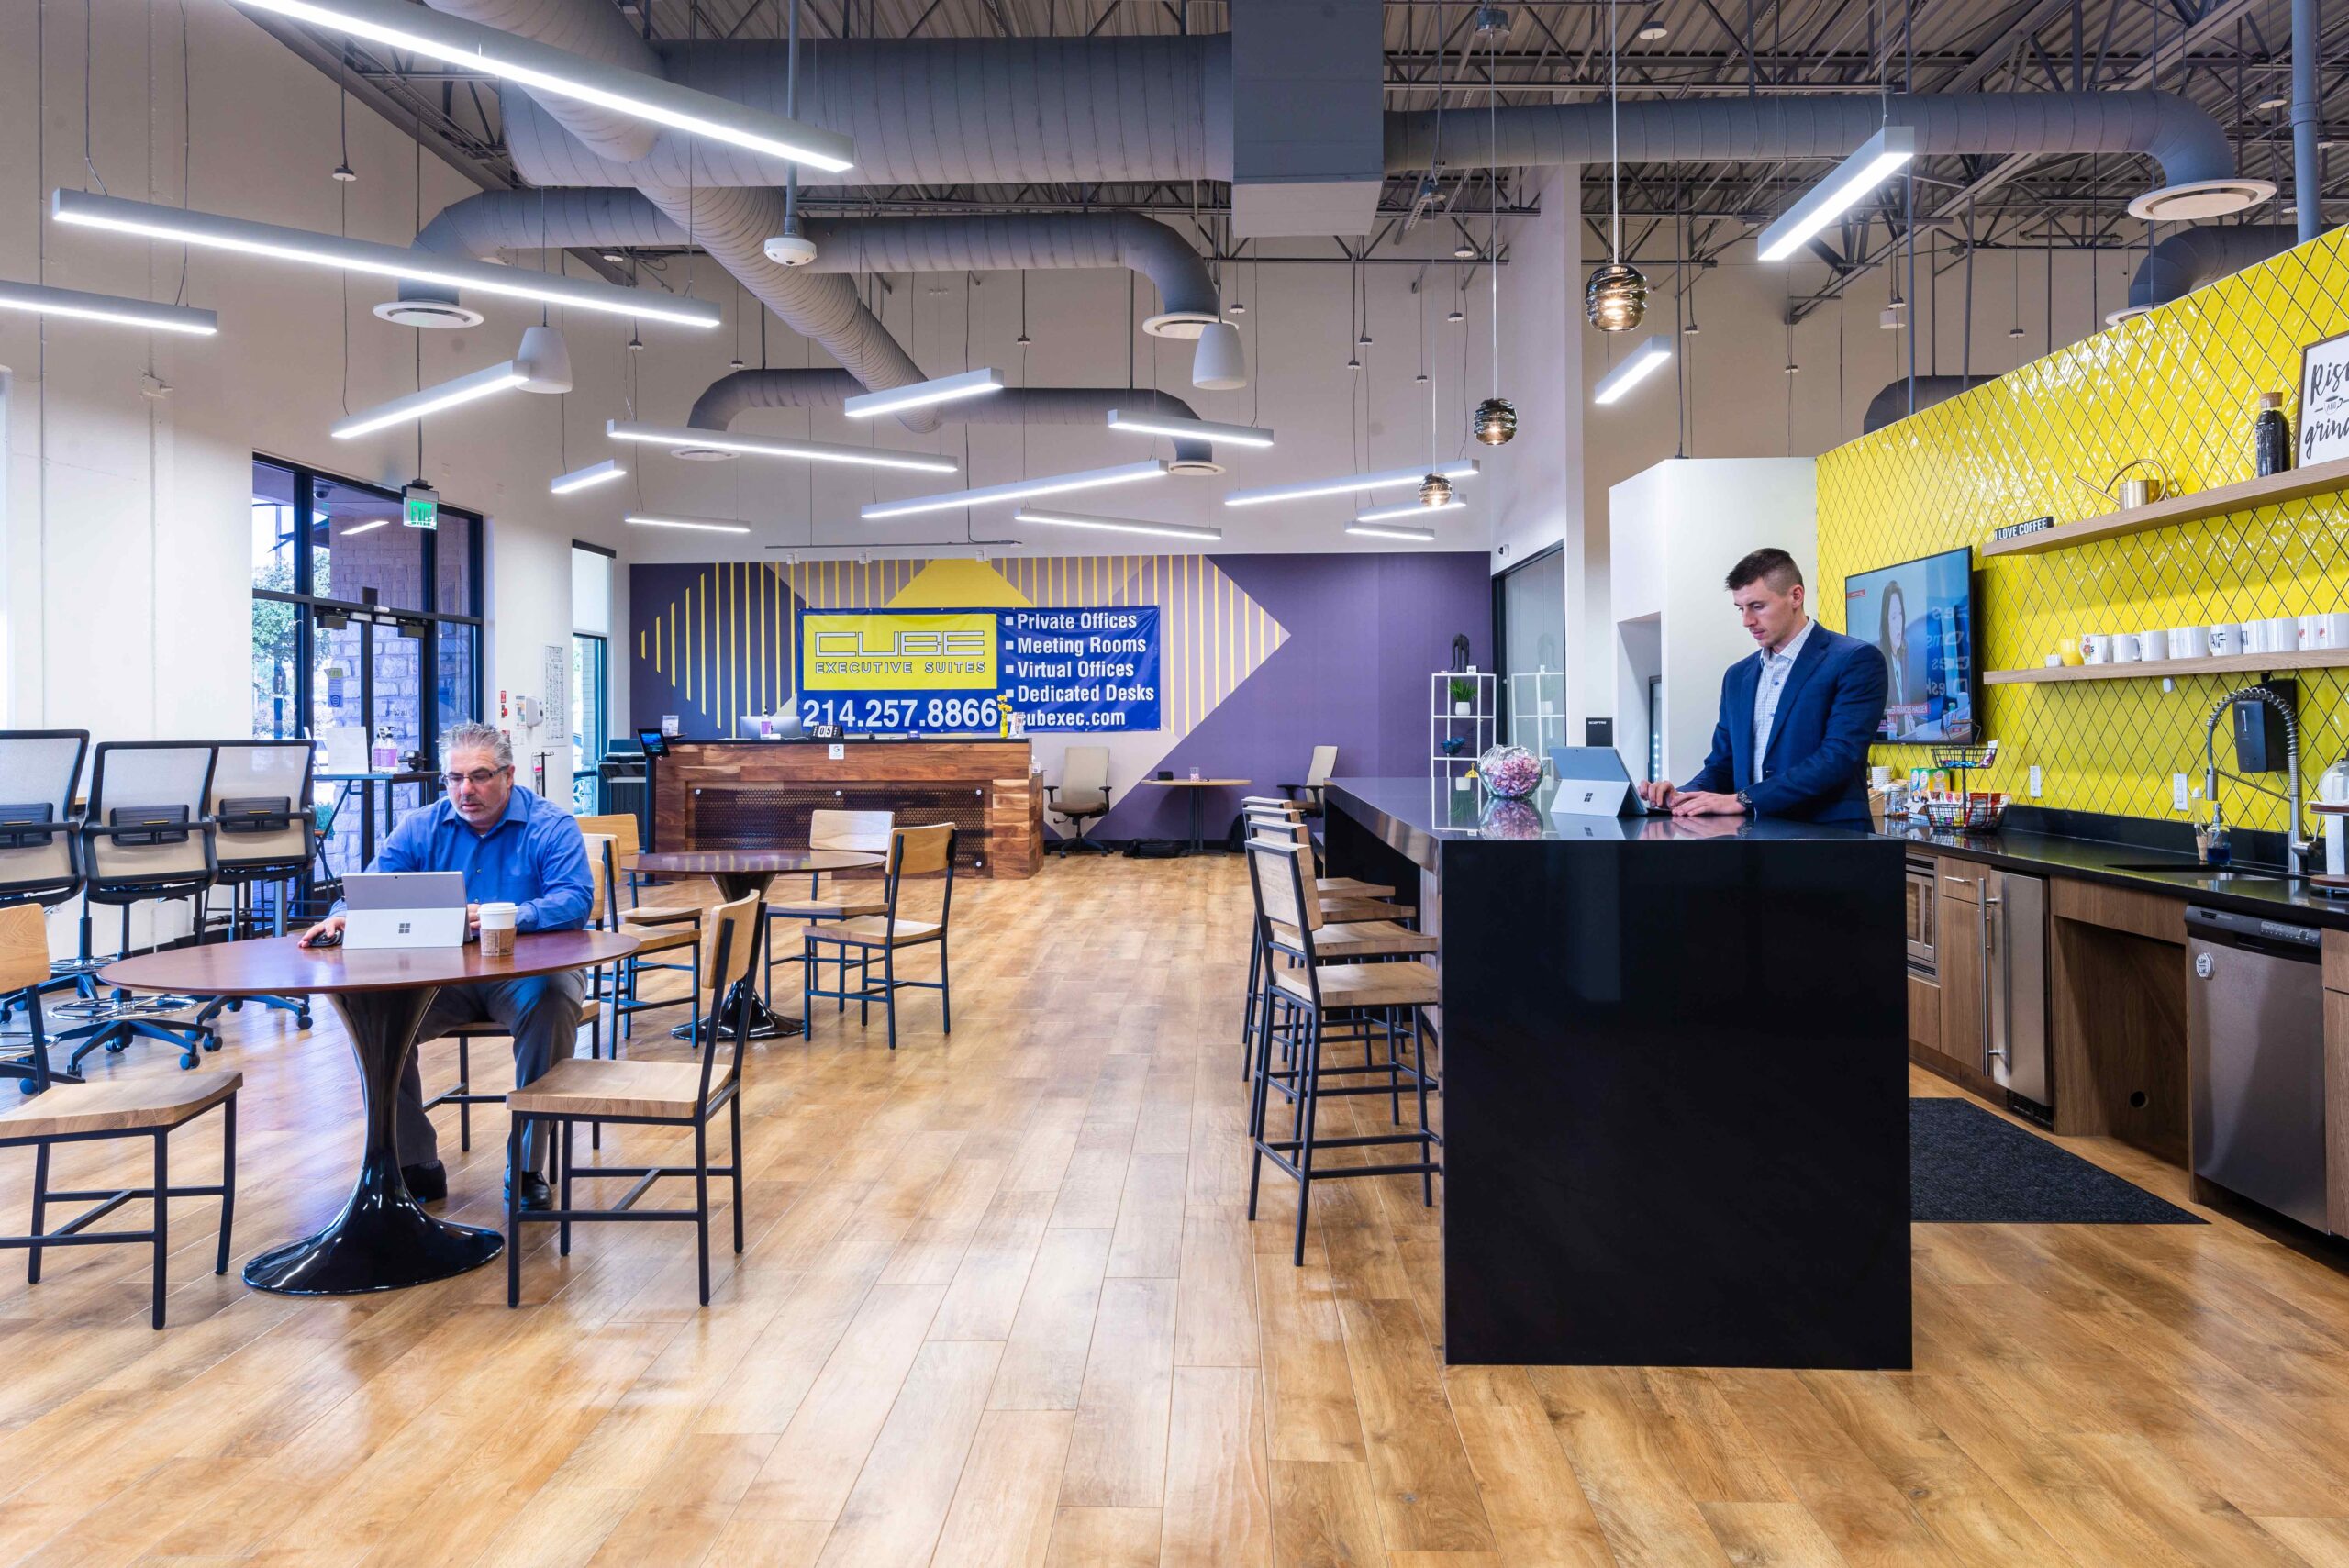 Coworking space in Dallas. Main room has many tables for groups of 4 to meet in a shared office space.